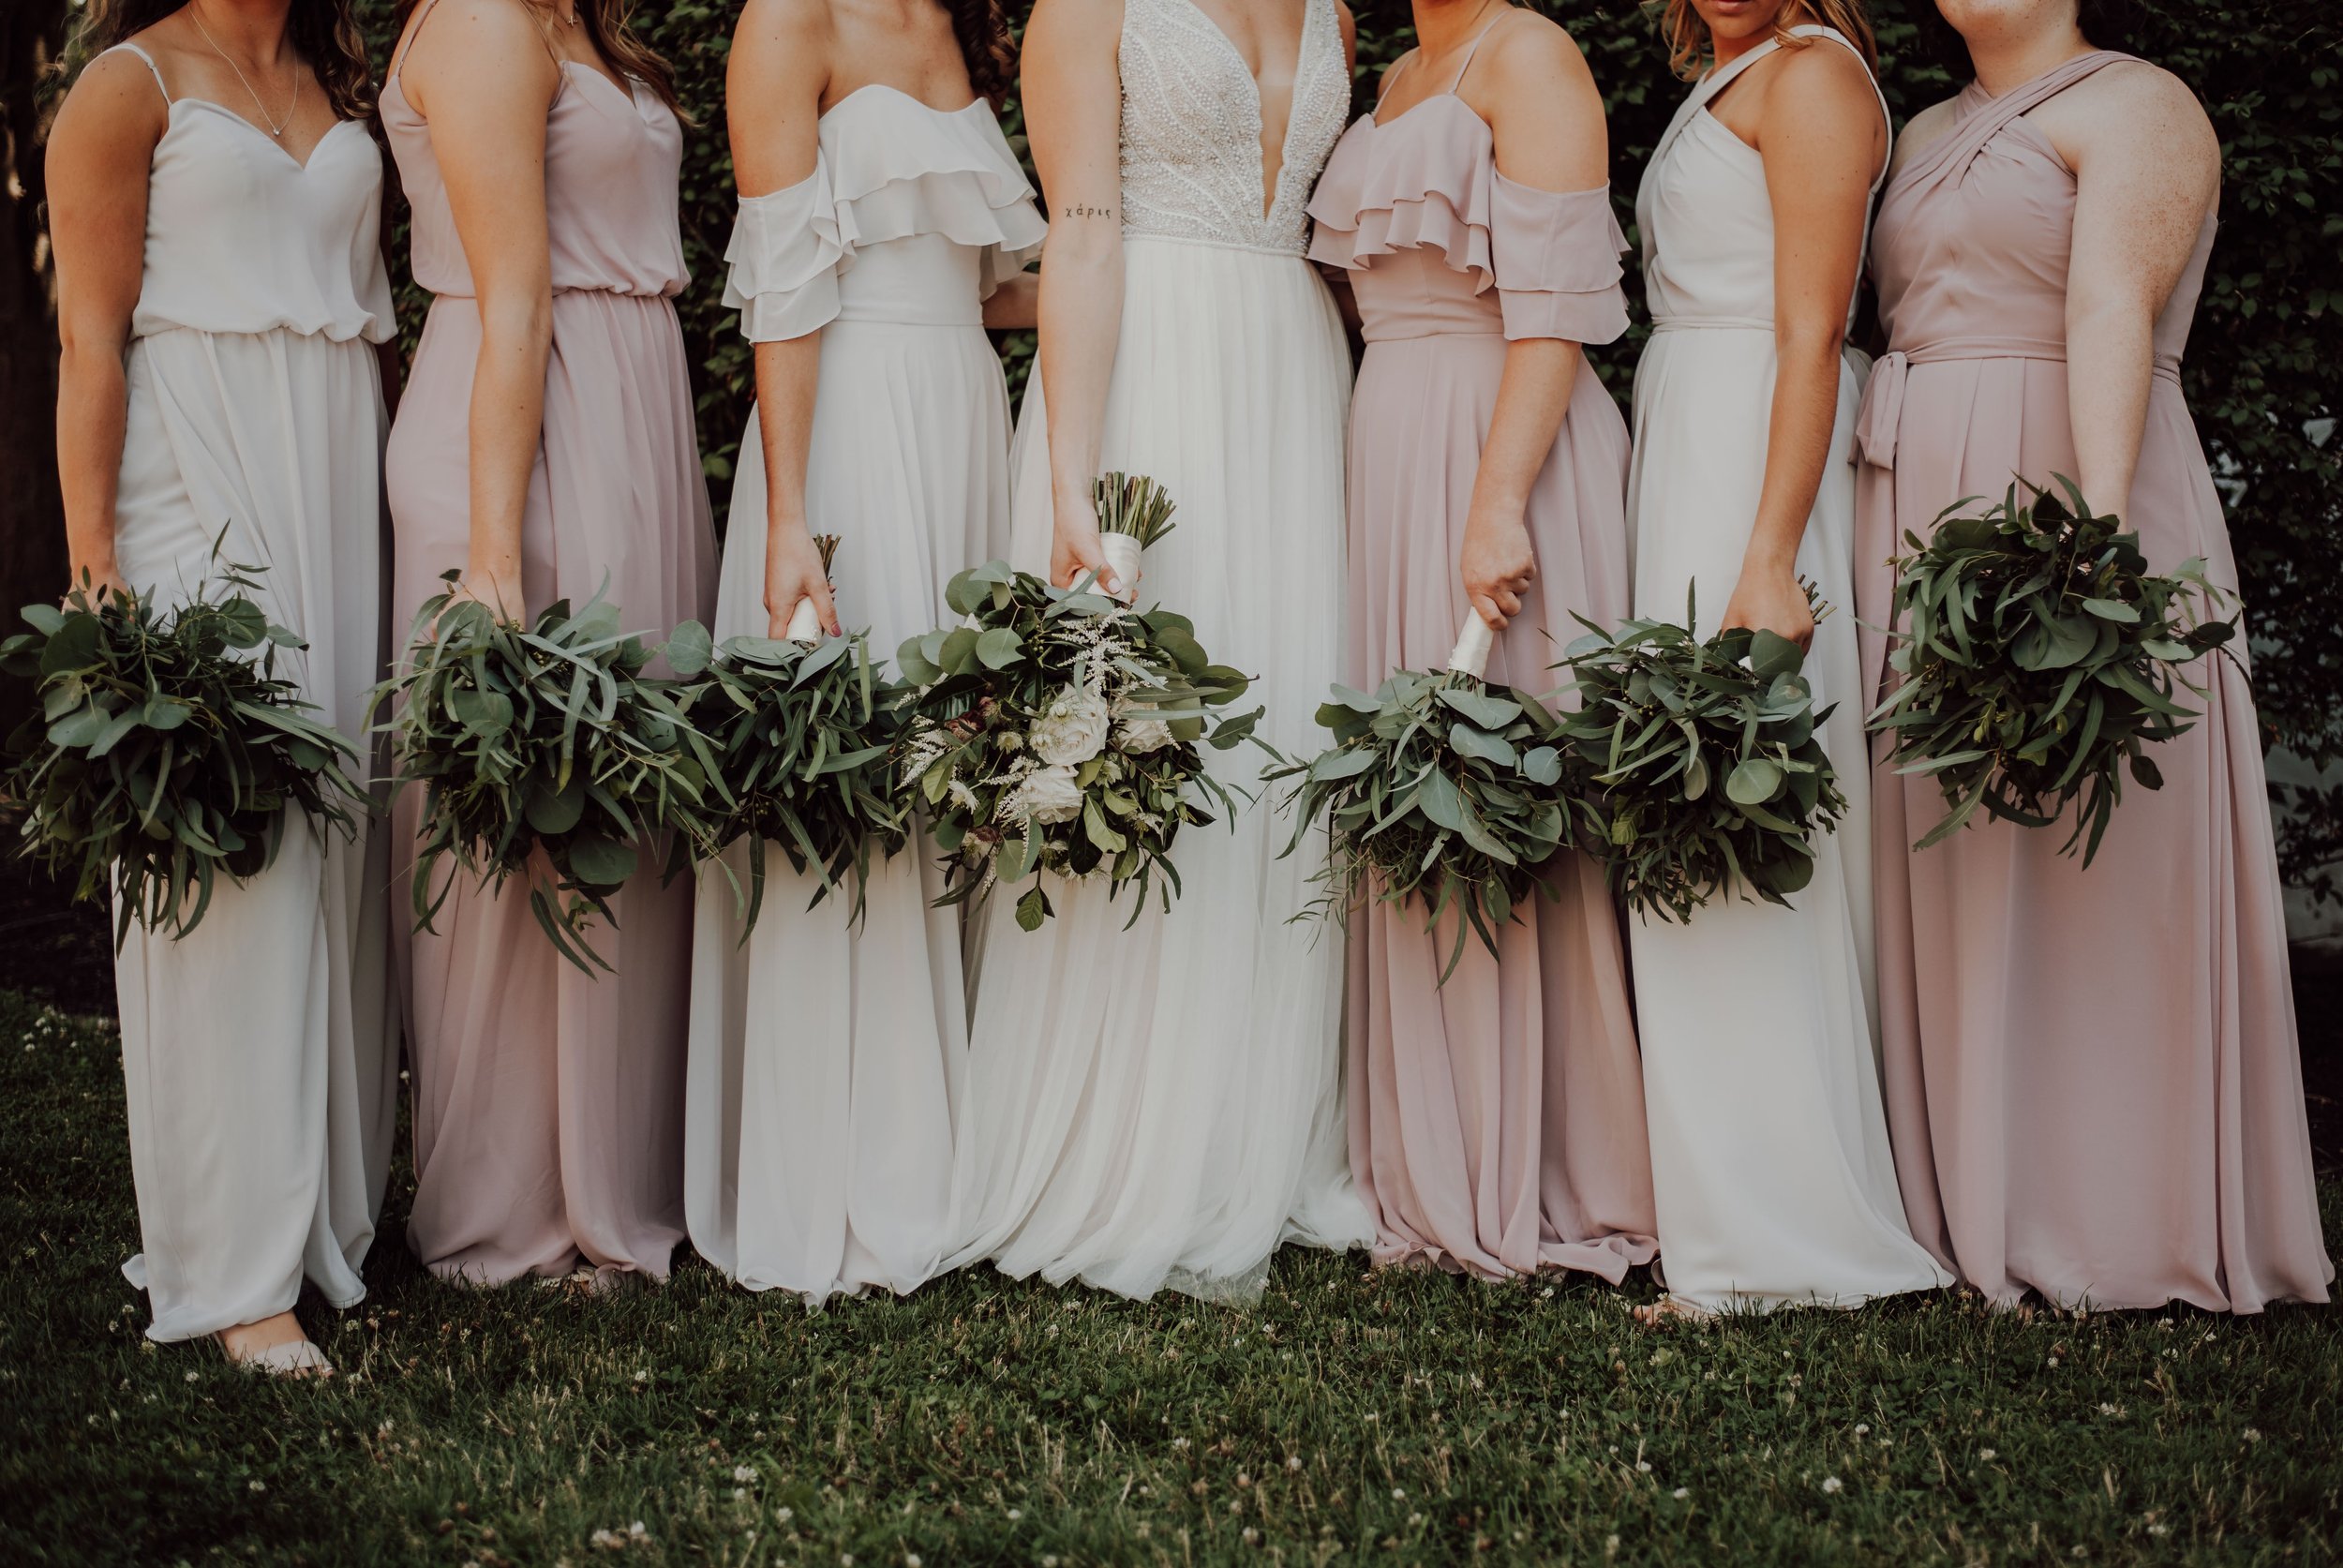 bride and bridesmaids in ivory and light pink dresses